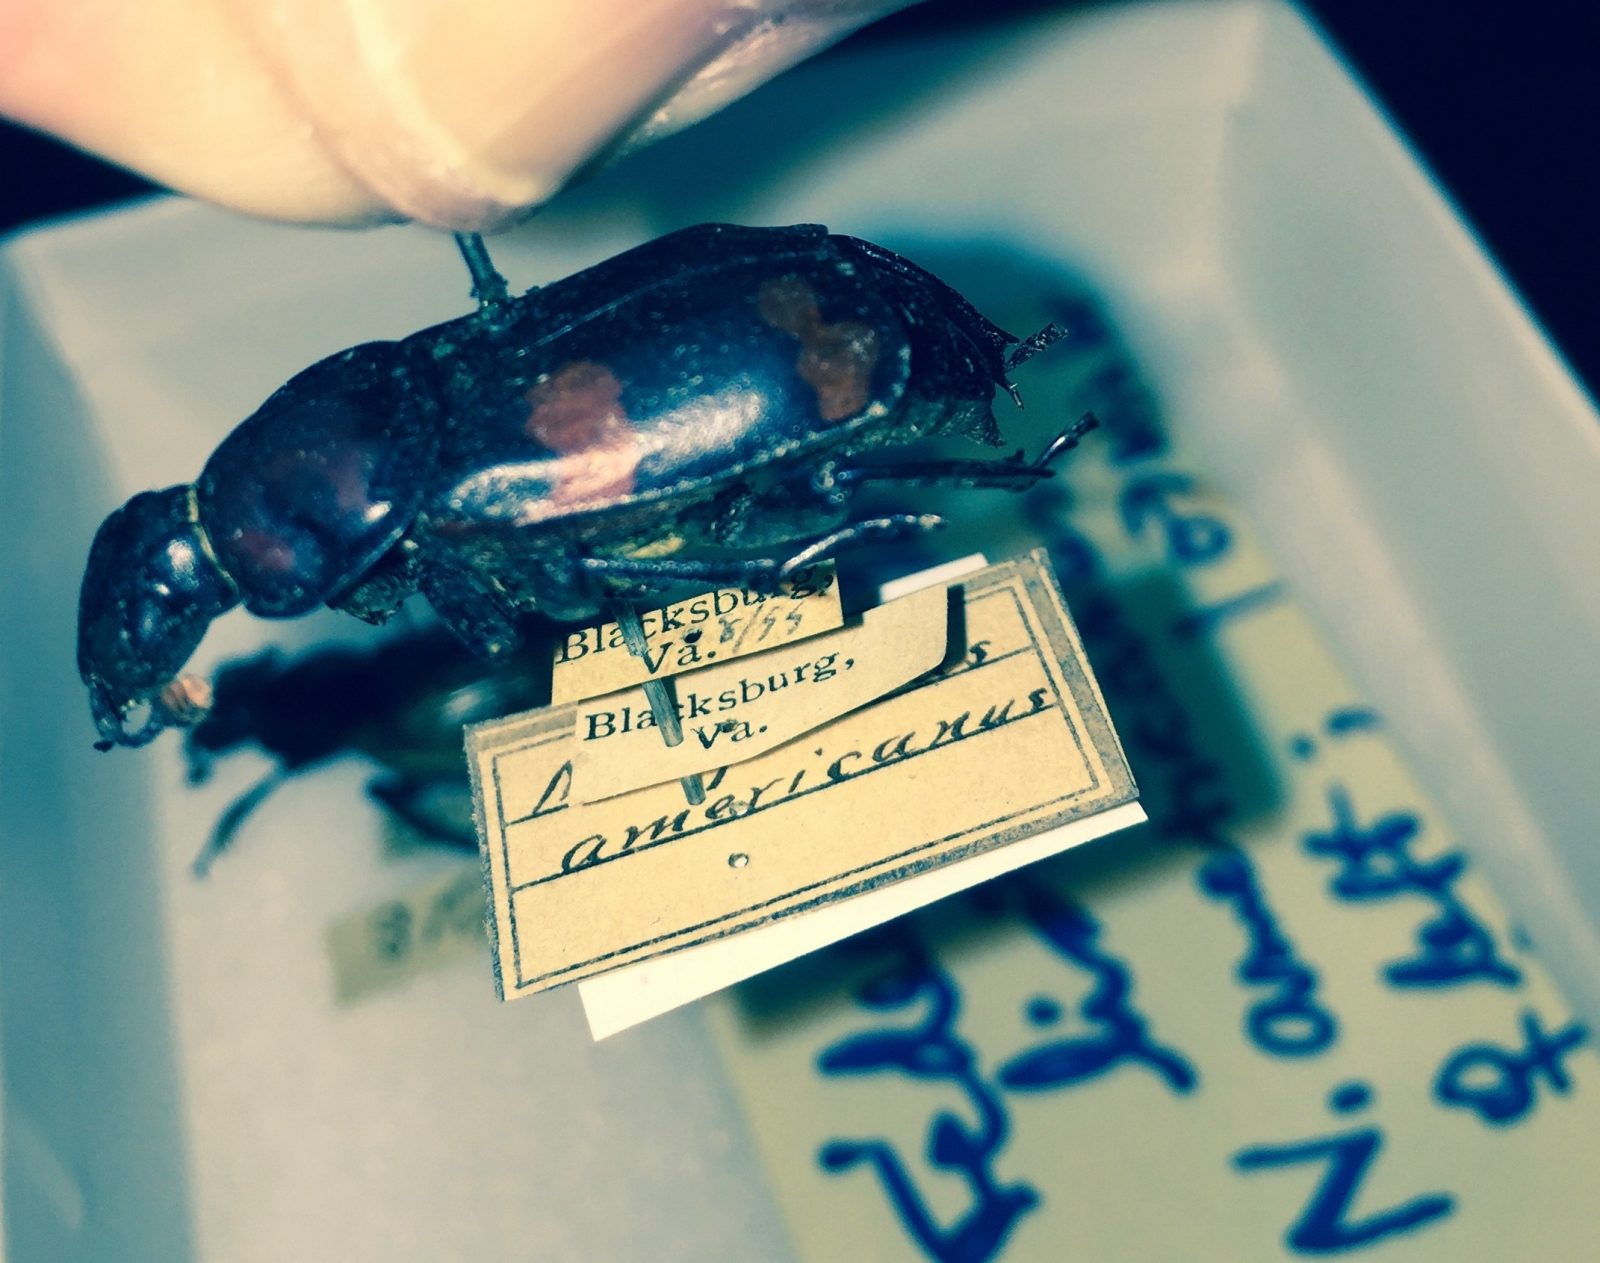 Virginia Tech Insect Collection - Alwood labeled specimen from 1899.